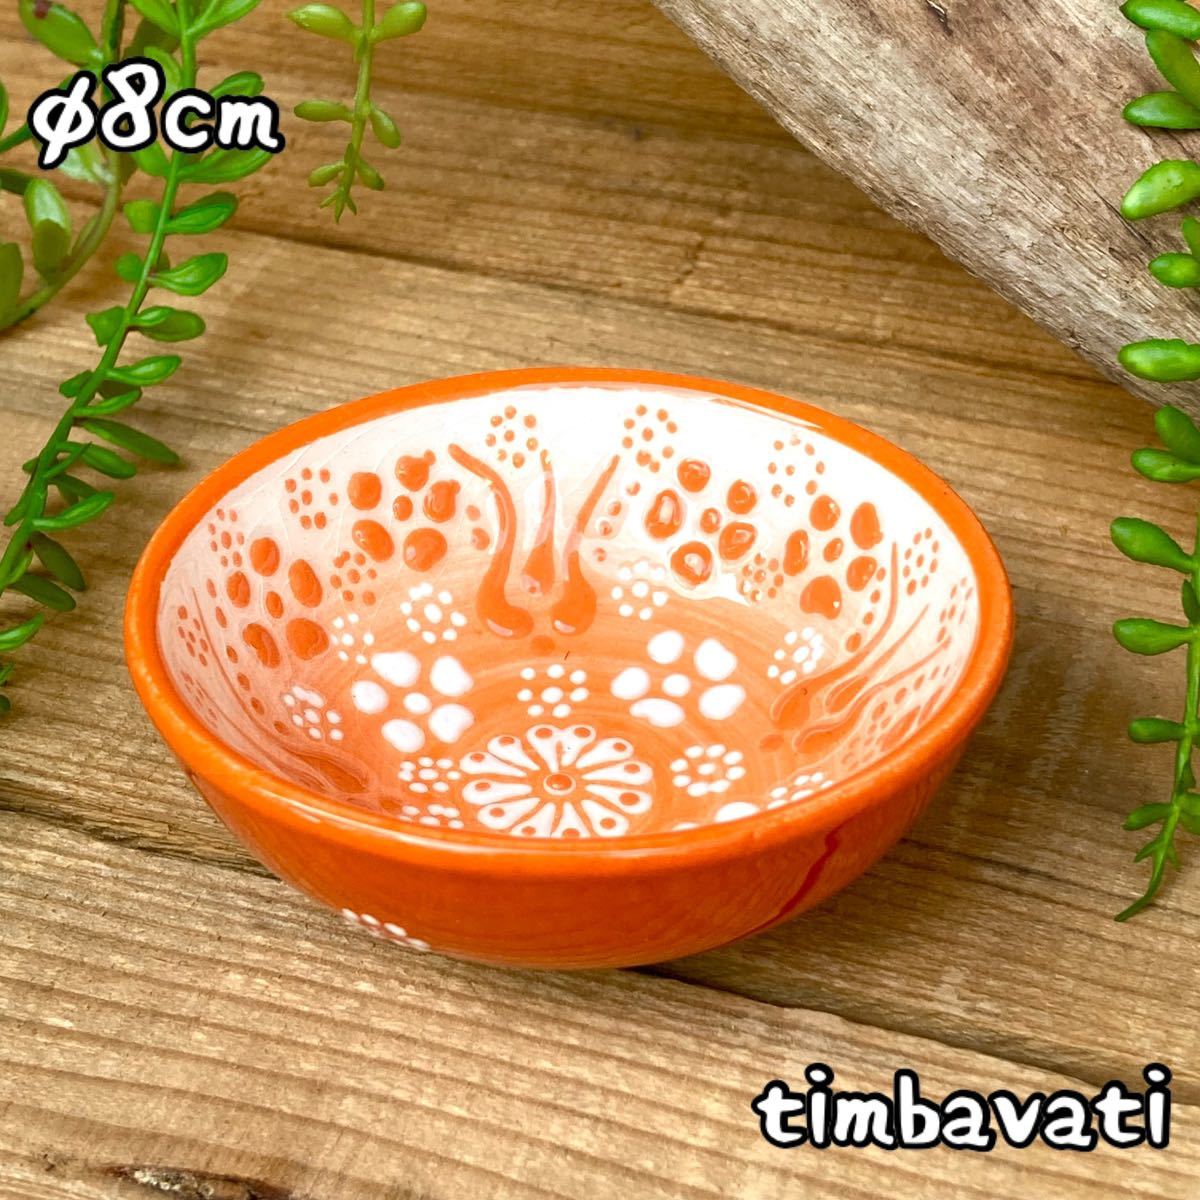 8cm☆New☆Turkish pottery bowl accessory case small plate handmade Kyutahya pottery orange [conditional free shipping] 176, Western tableware, bowl, others